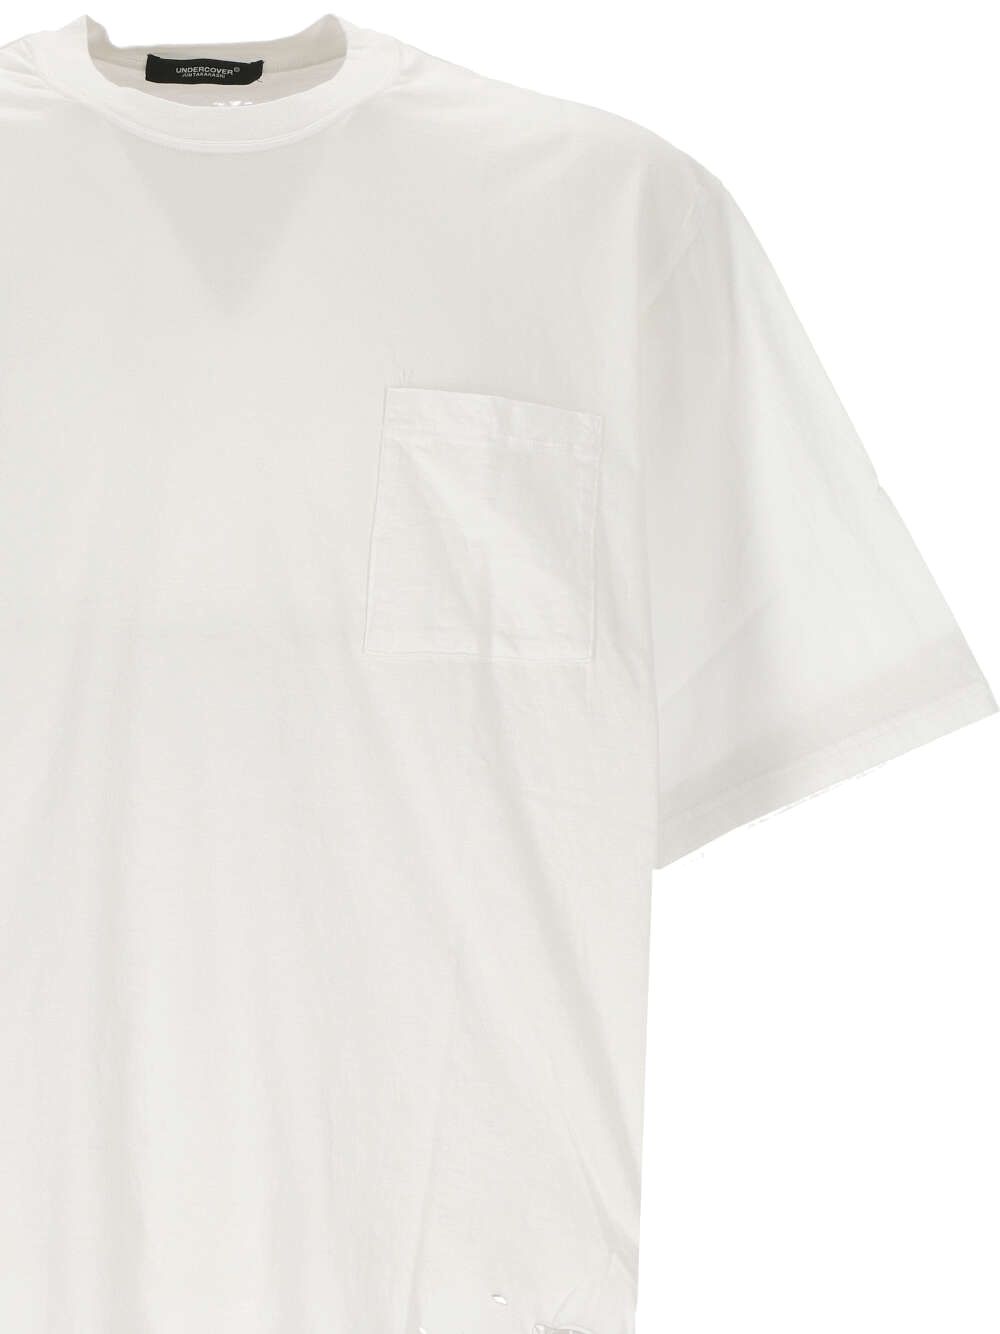 Undercover White T-shirt and Polo